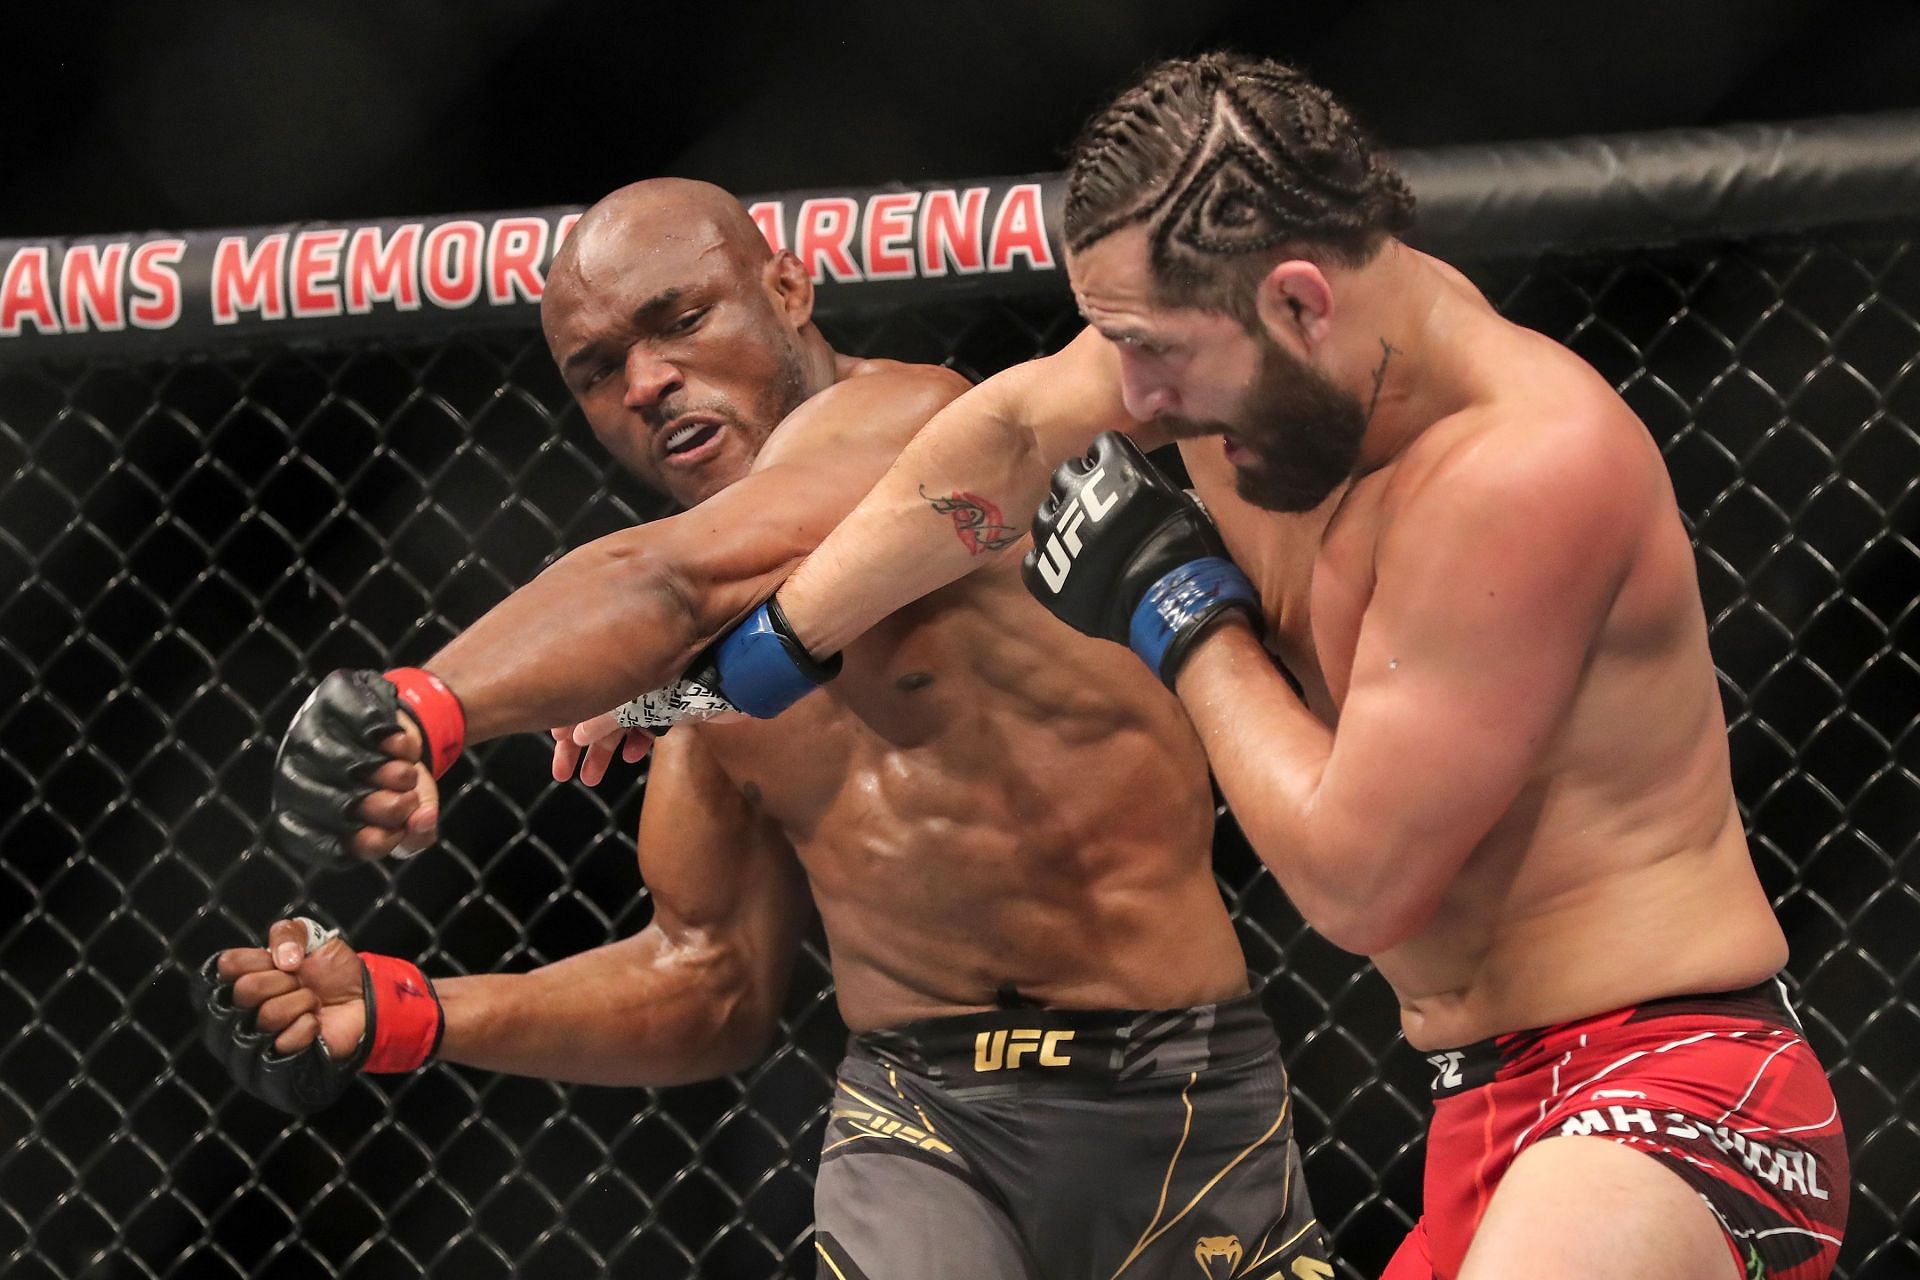 Kamaru Usman surprised the fans by striking with Jorge Masvidal in their rematch